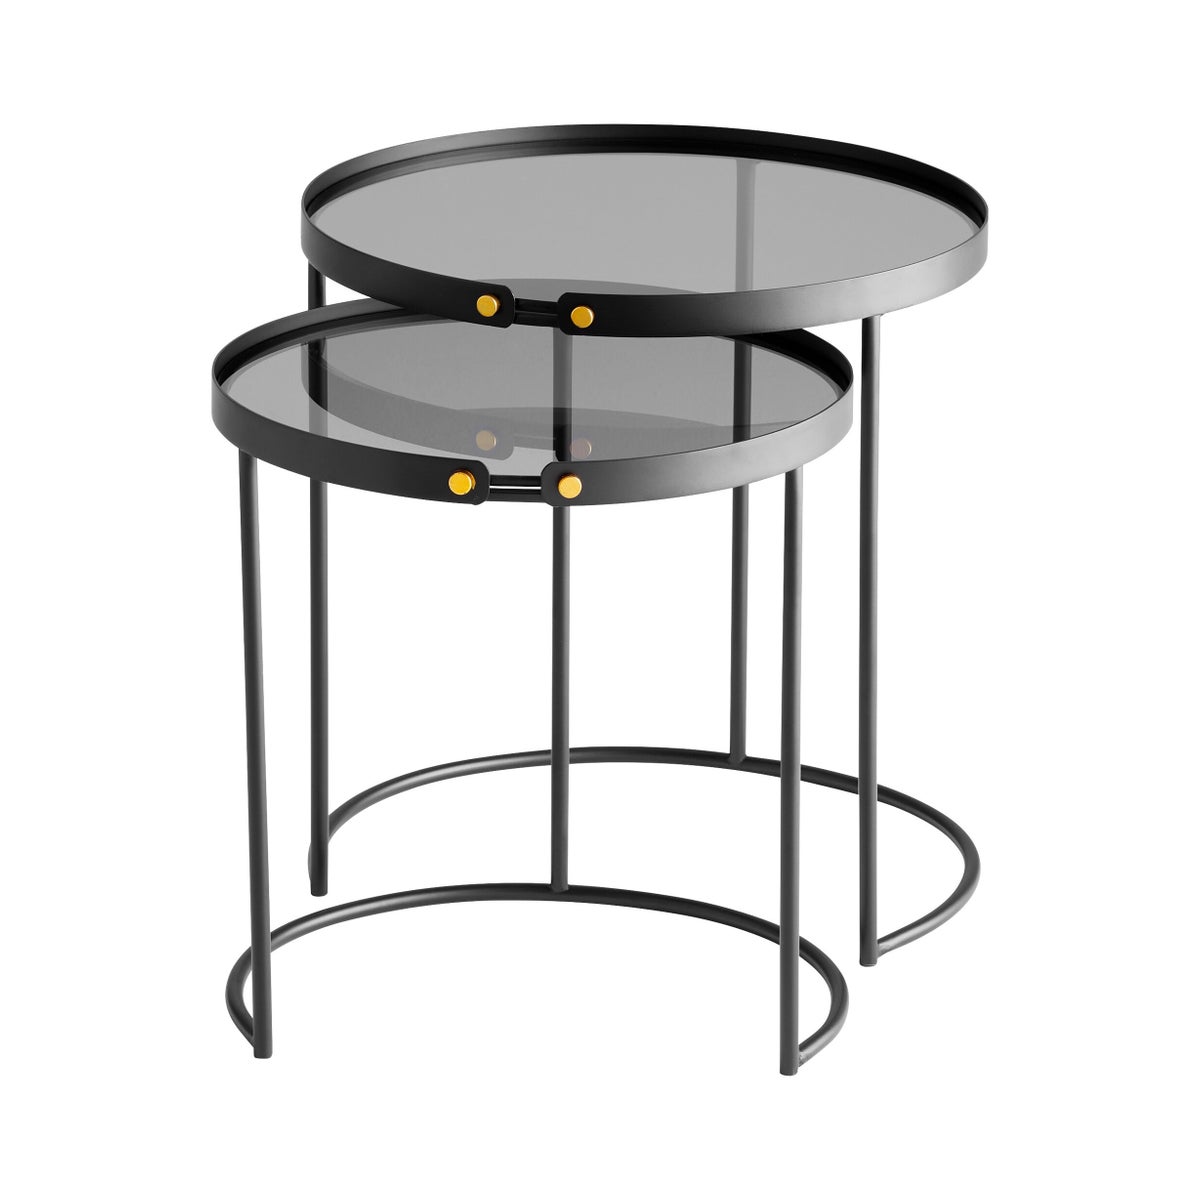 Flat Bow Tie Tables | Graphite